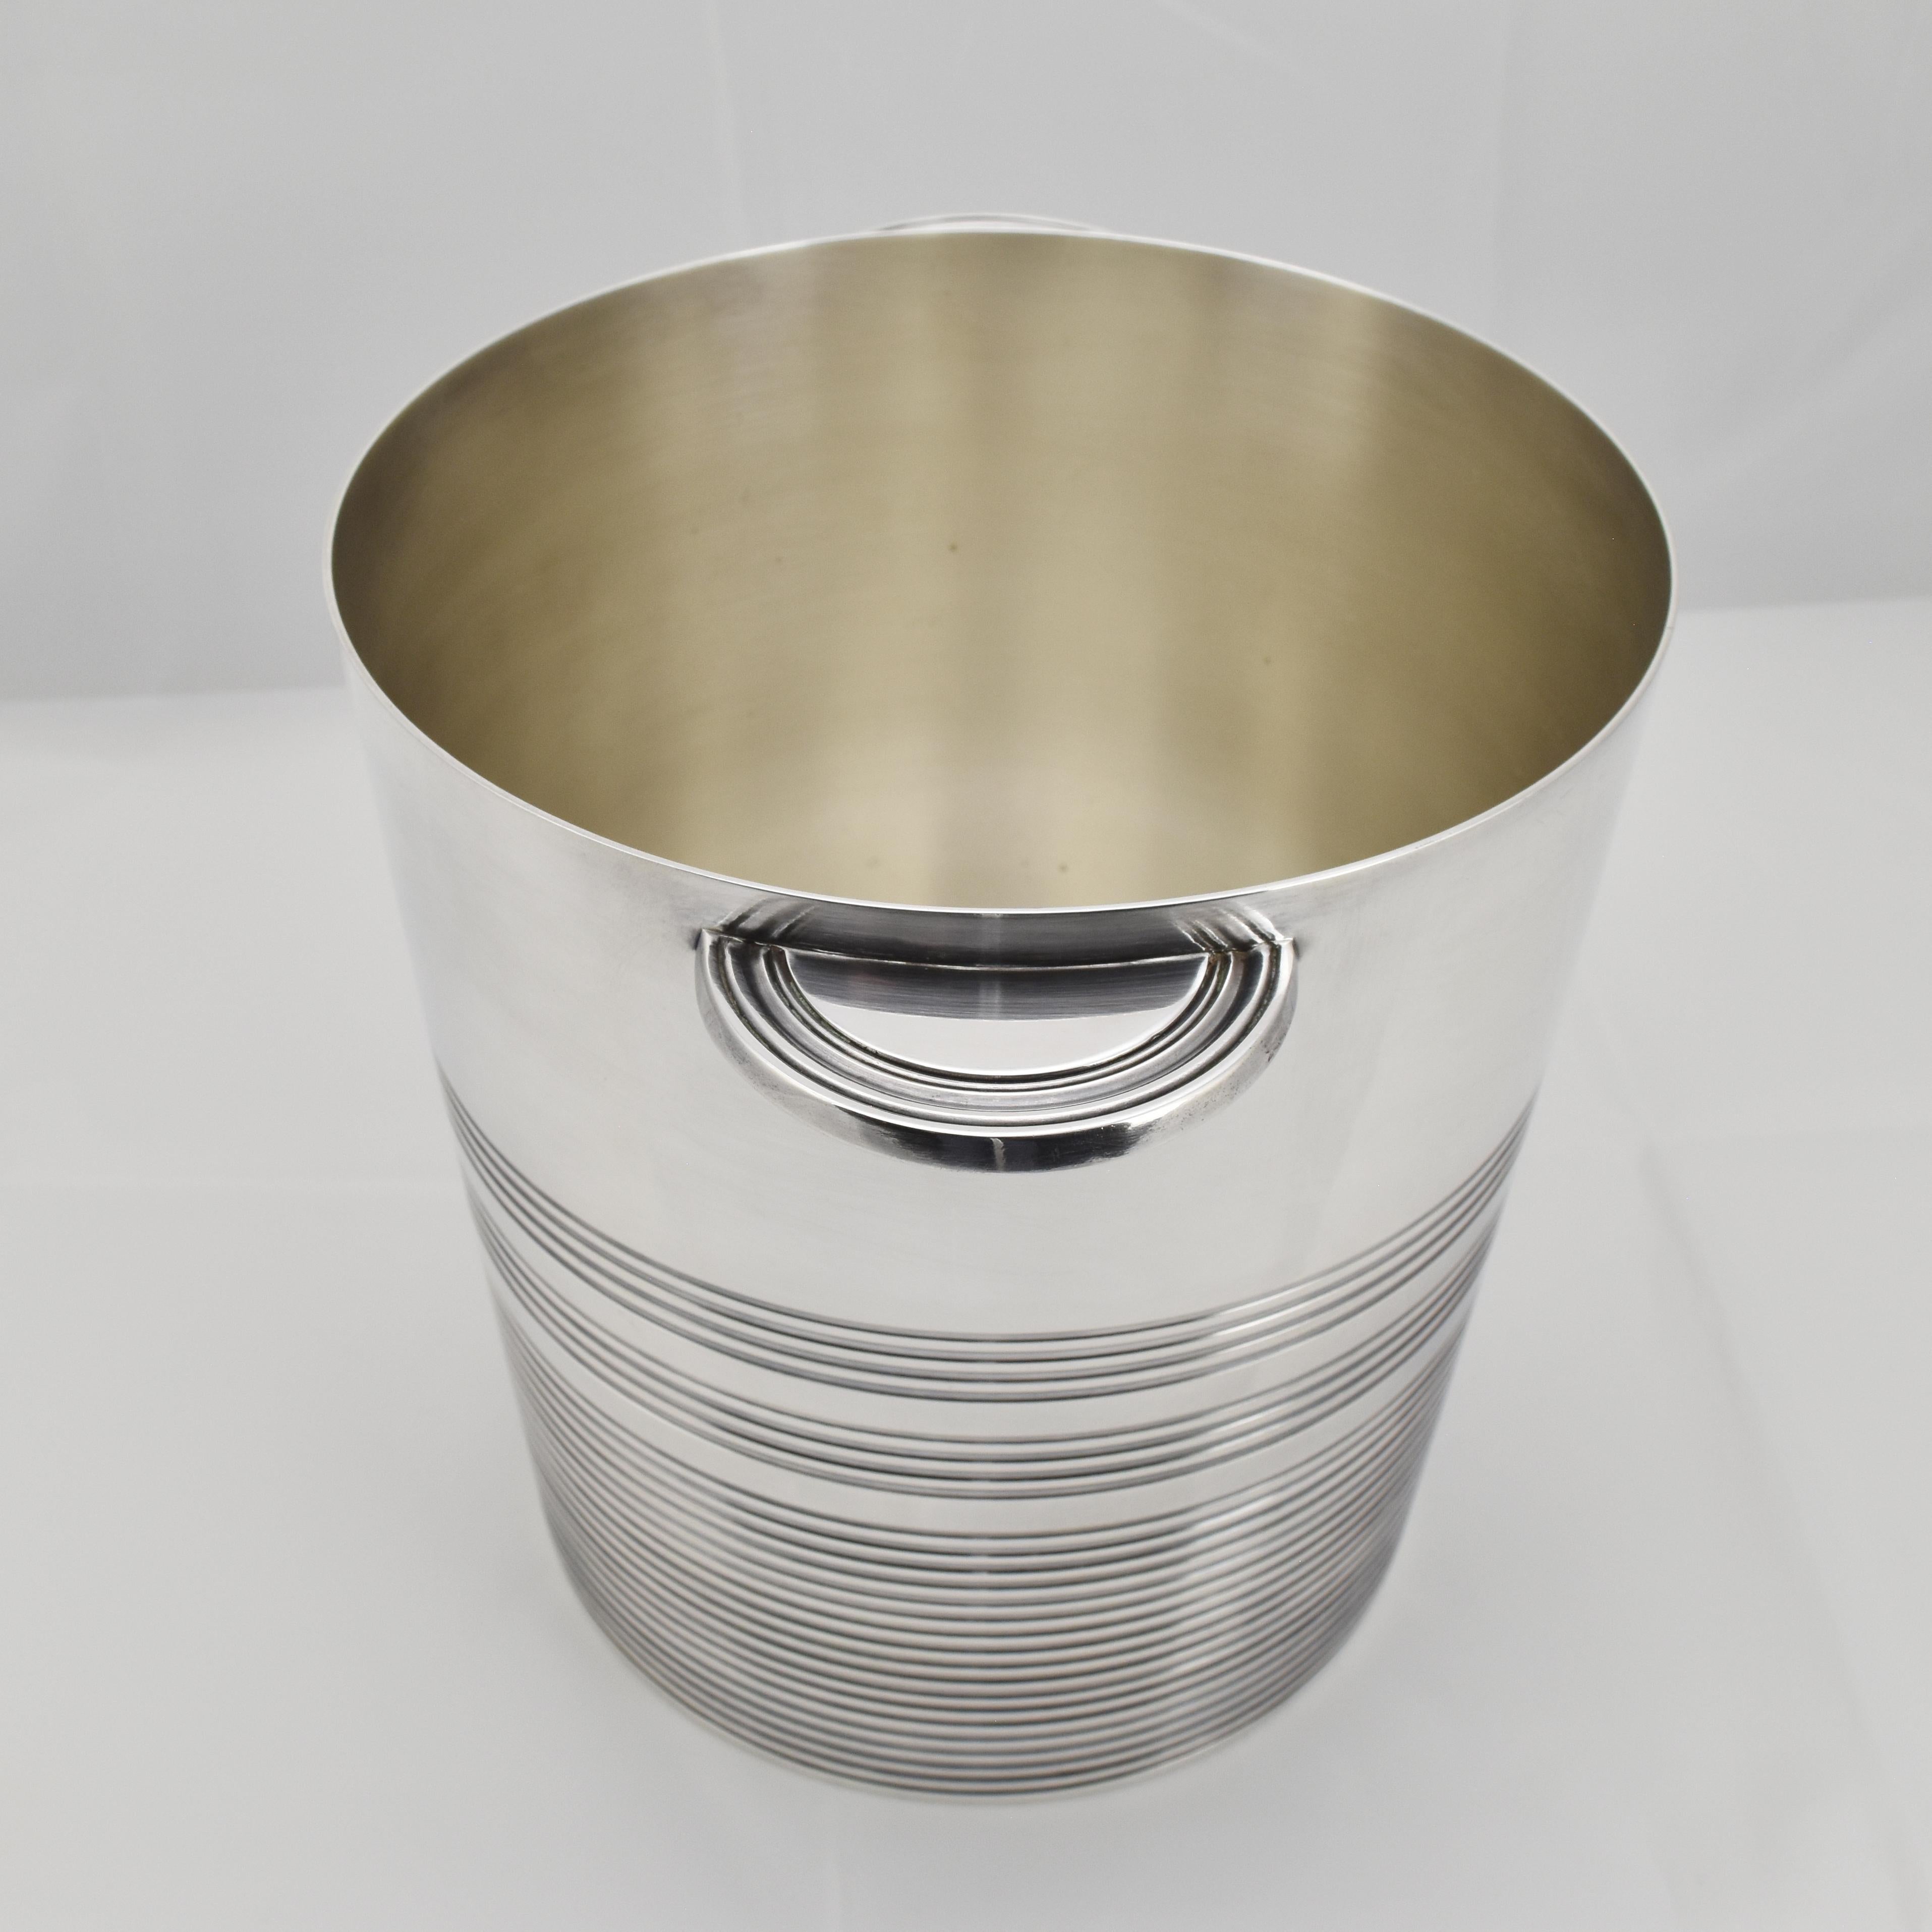 This French Art Deco champagne cooler is an absolutely elegant Modernist masterpiece made by the well-known manufacturer Ercuis in the 1920s.

This piece is not just a functional vessels for chilling champagne, it is also an elegant and